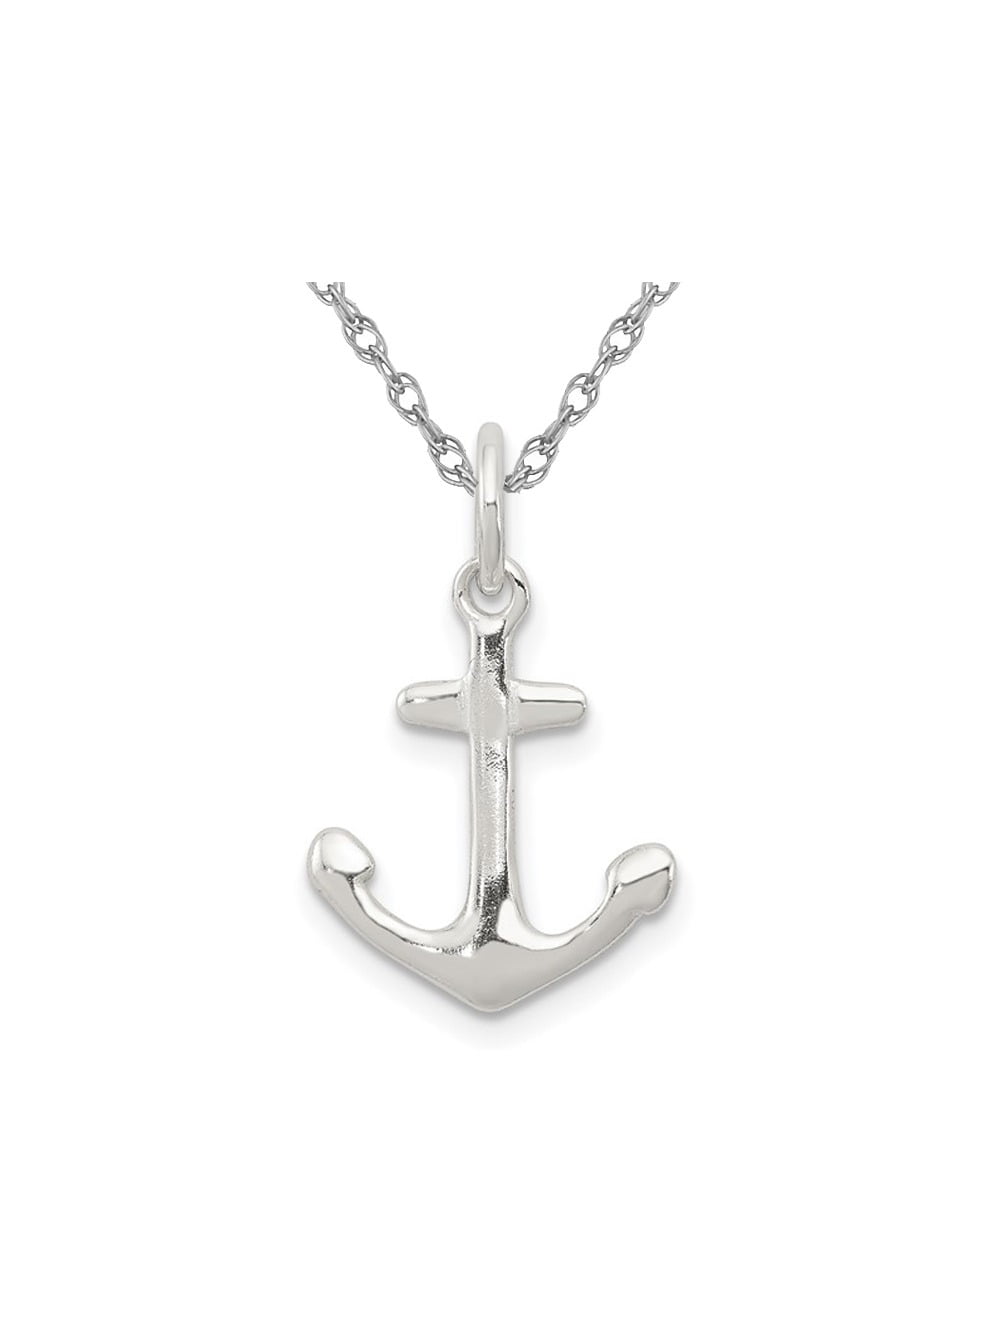 Tiny Silver Trident Anchor Necklace Sterling Silver Trident Anchor Charm on a Delicate Sterling Silver Cable Chain or Charm Only